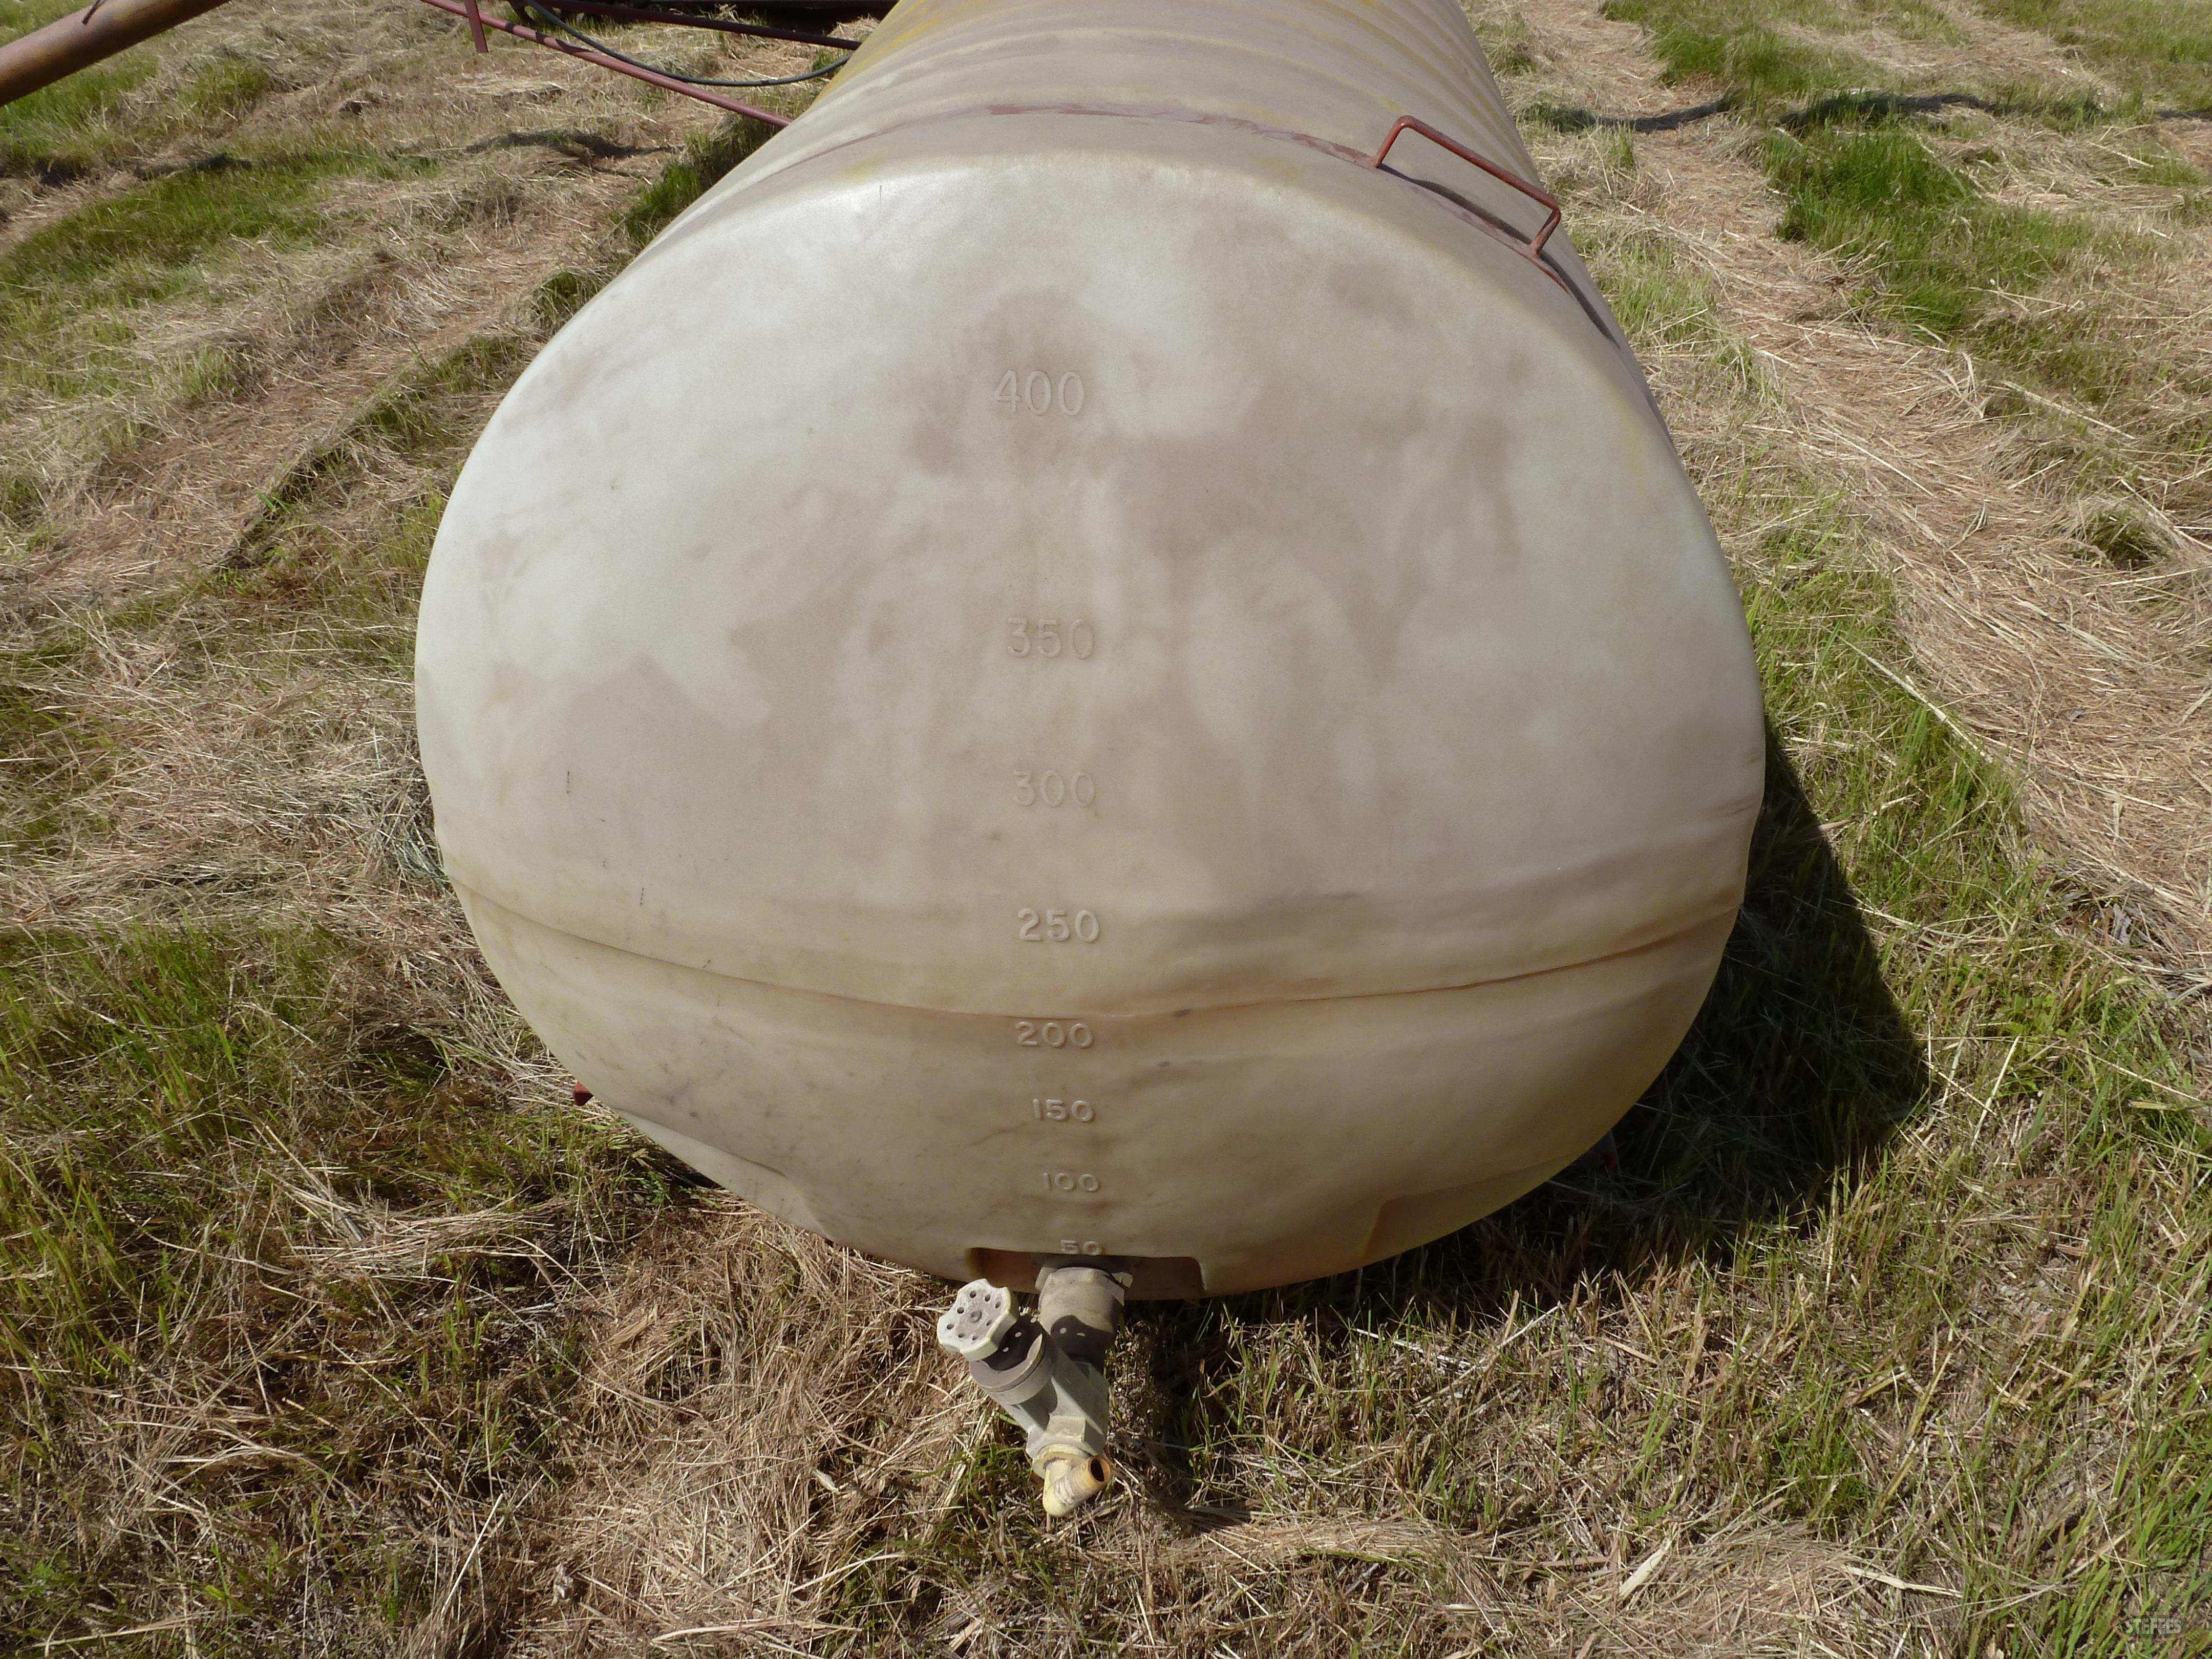 Water/chemical tank,